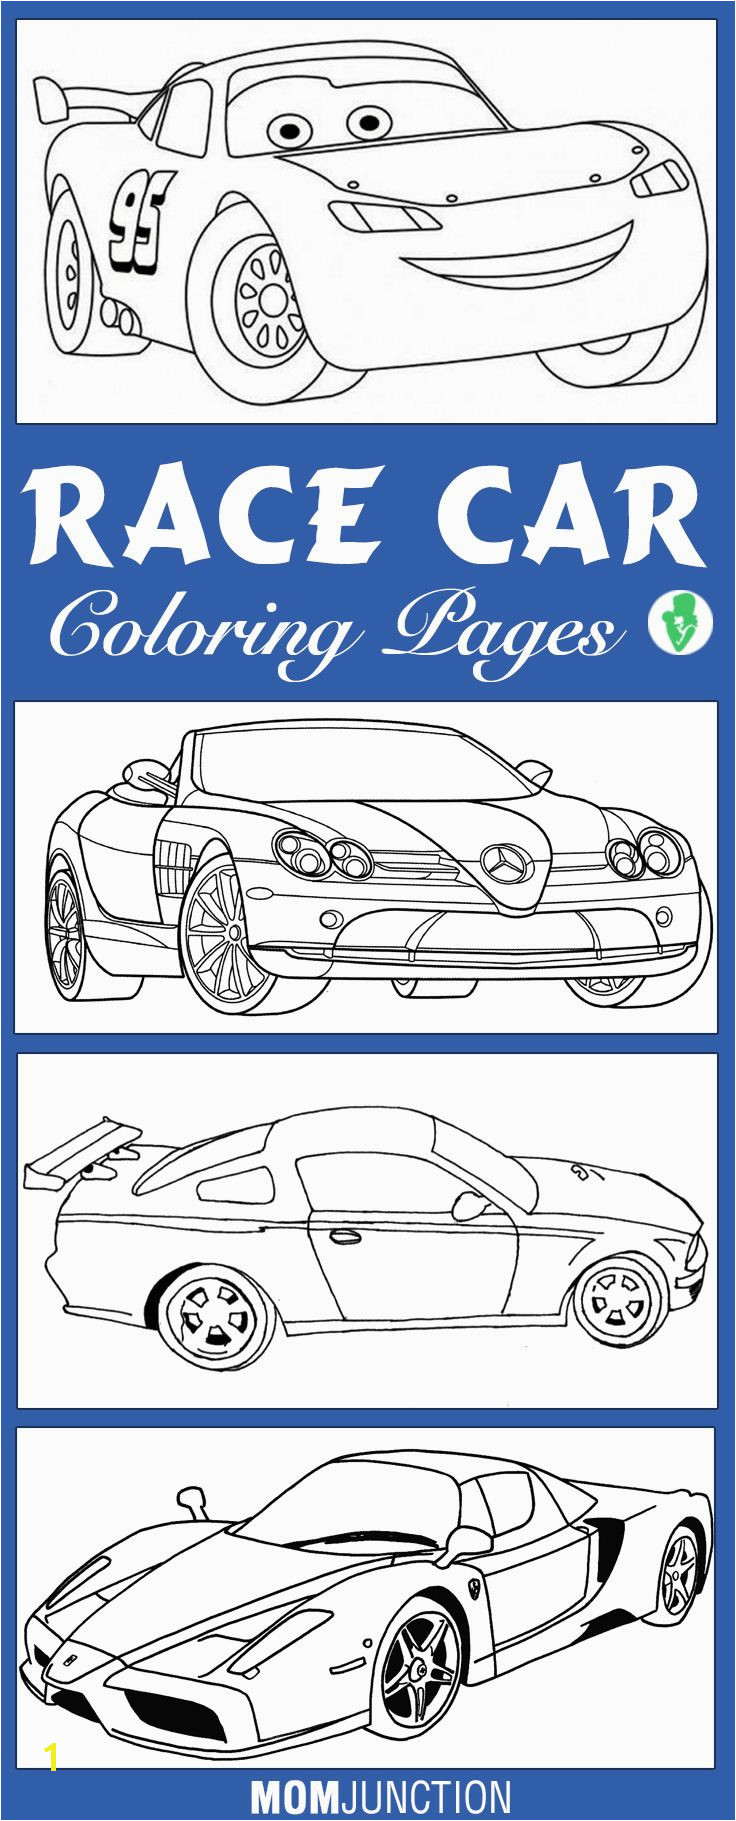 Cool Car Coloring Pages Awesome Cool Vases Flower Vase Coloring Page Pages Flowers In A top